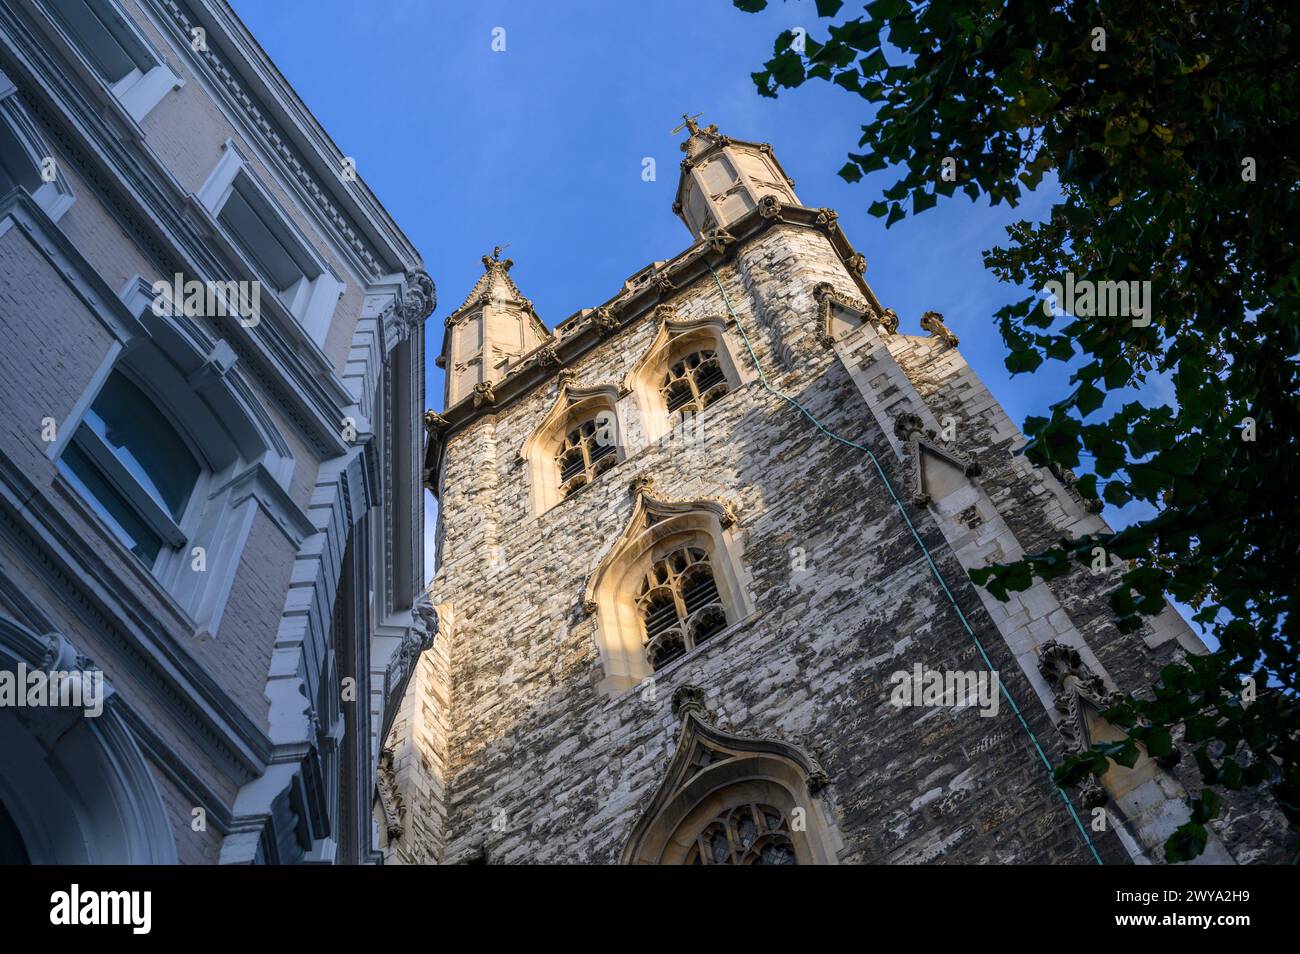 Sun catching the bell tower of the Holy Sepulchre Church, London, England. Stock Photo